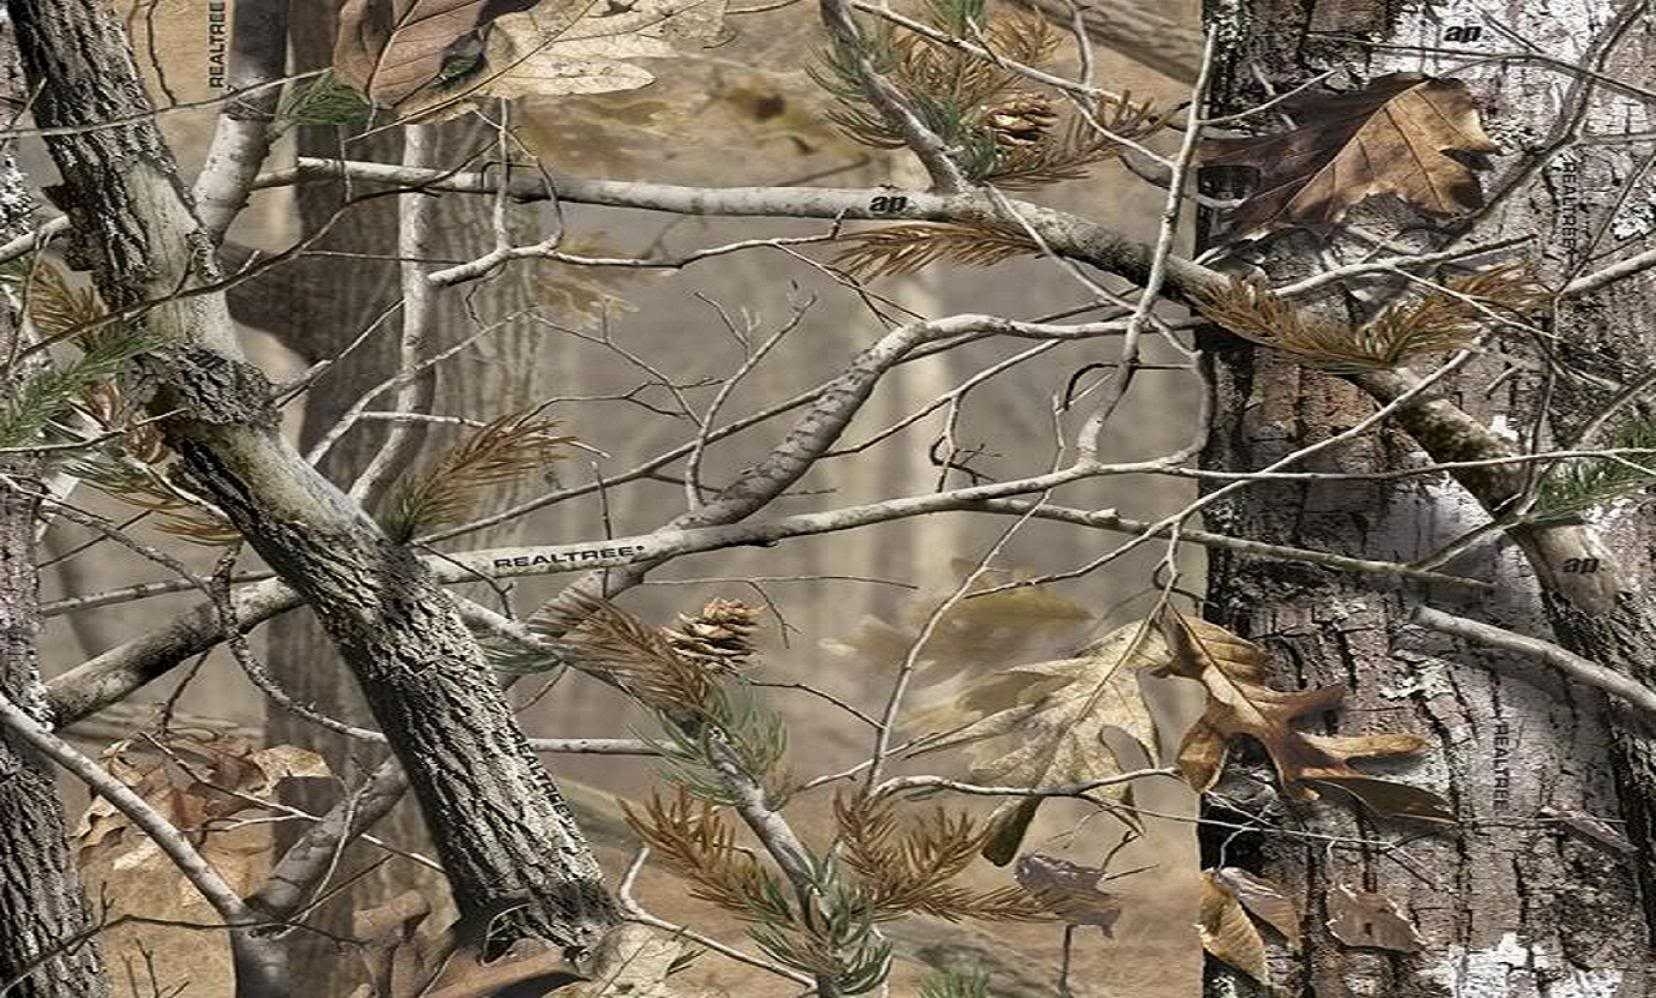 10 Most Popular Realtree Camouflage Wallpaper Hd FULL HD 1920×1080 For PC Background